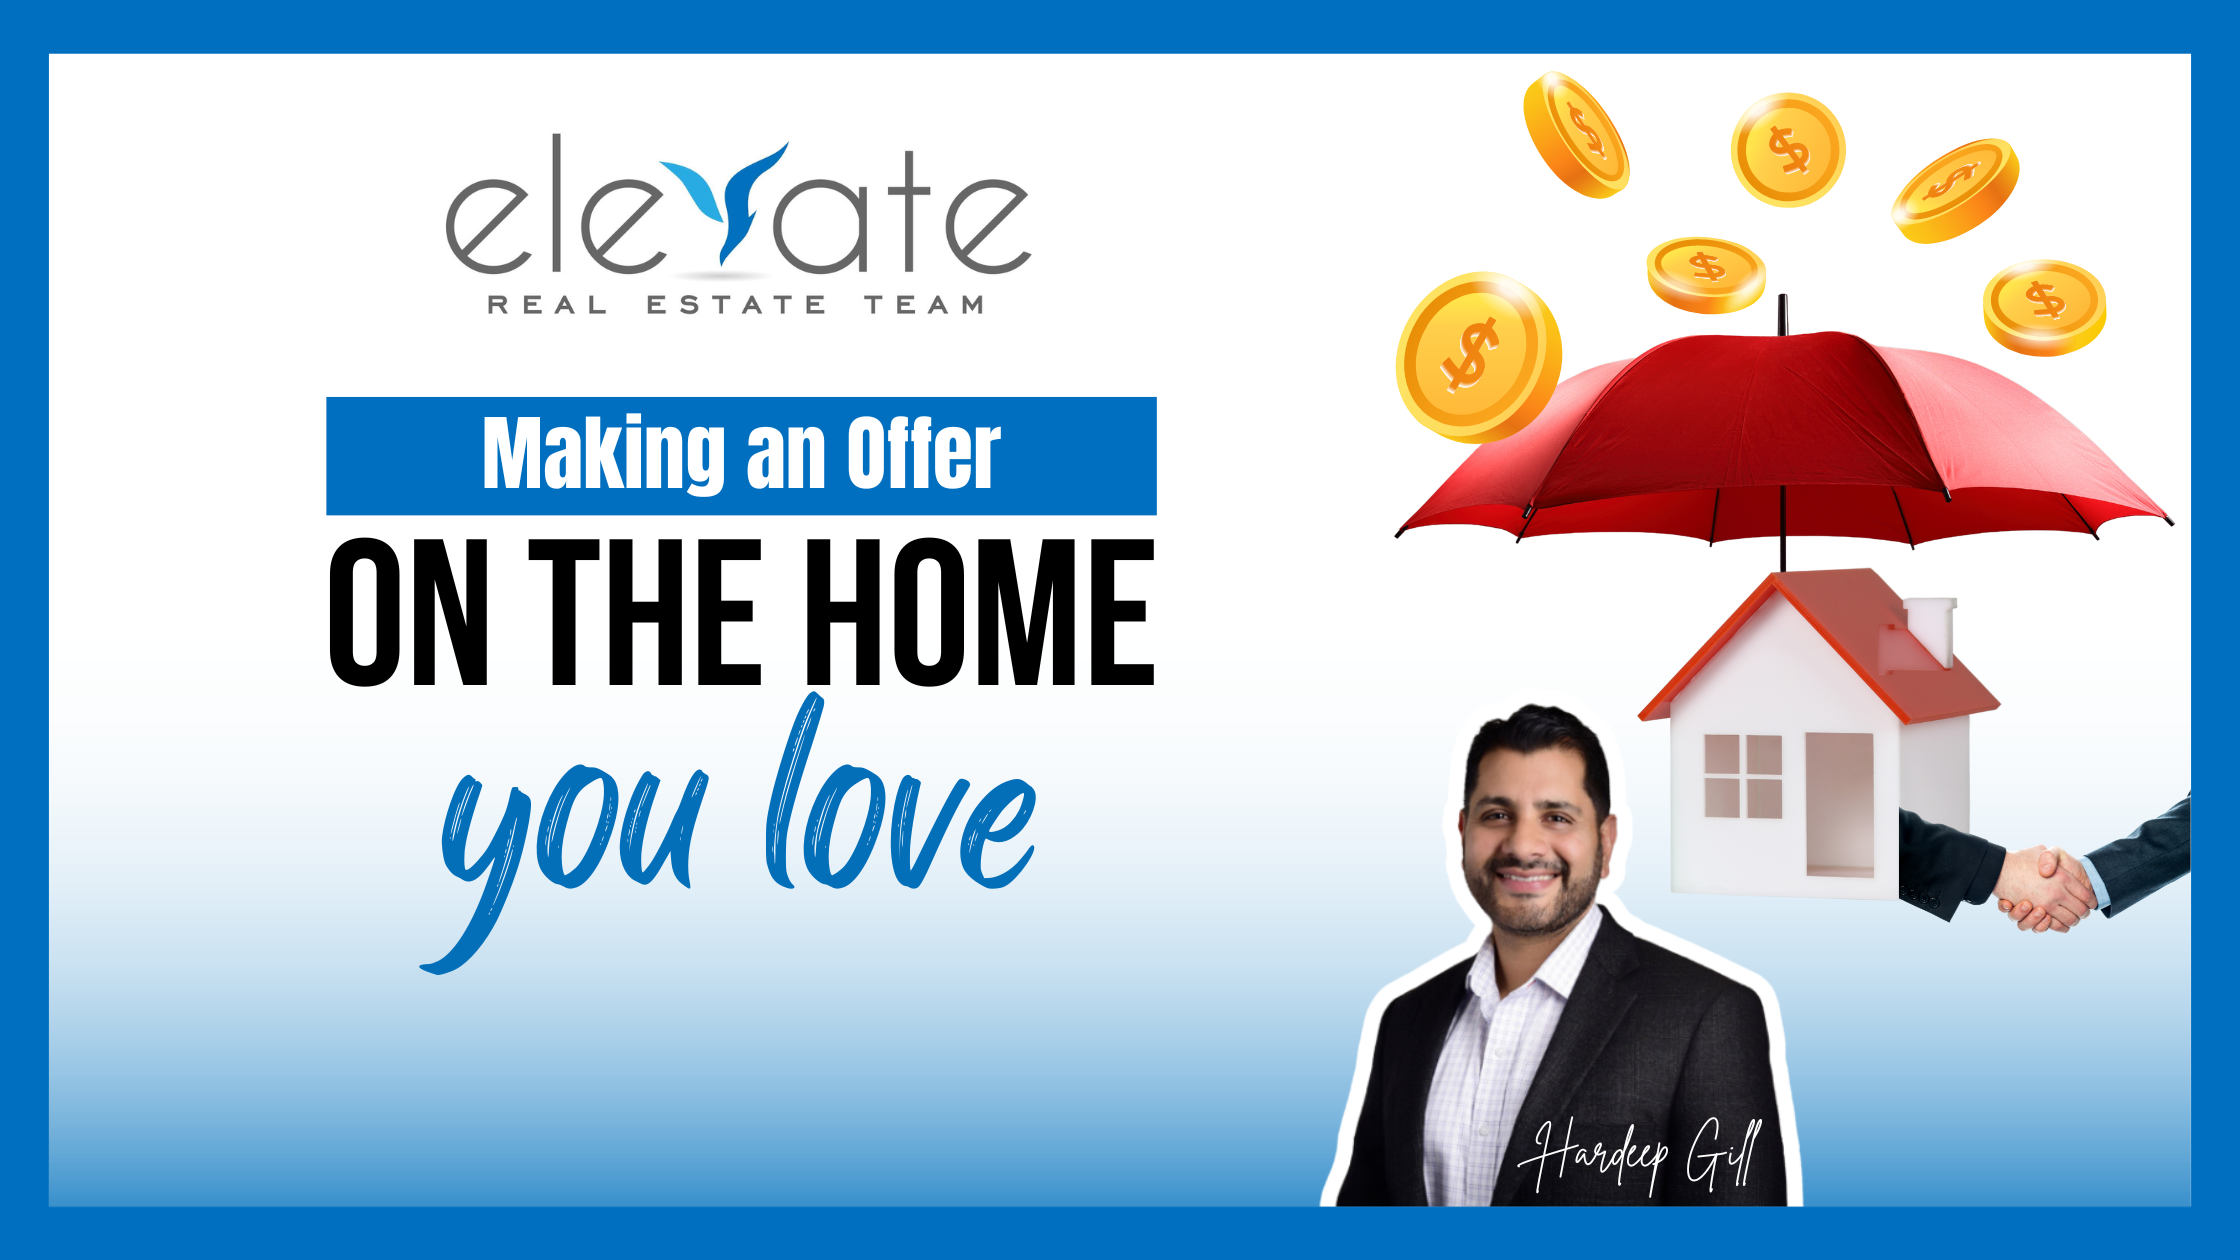 Making an Offer on the HOME YOU LOVE